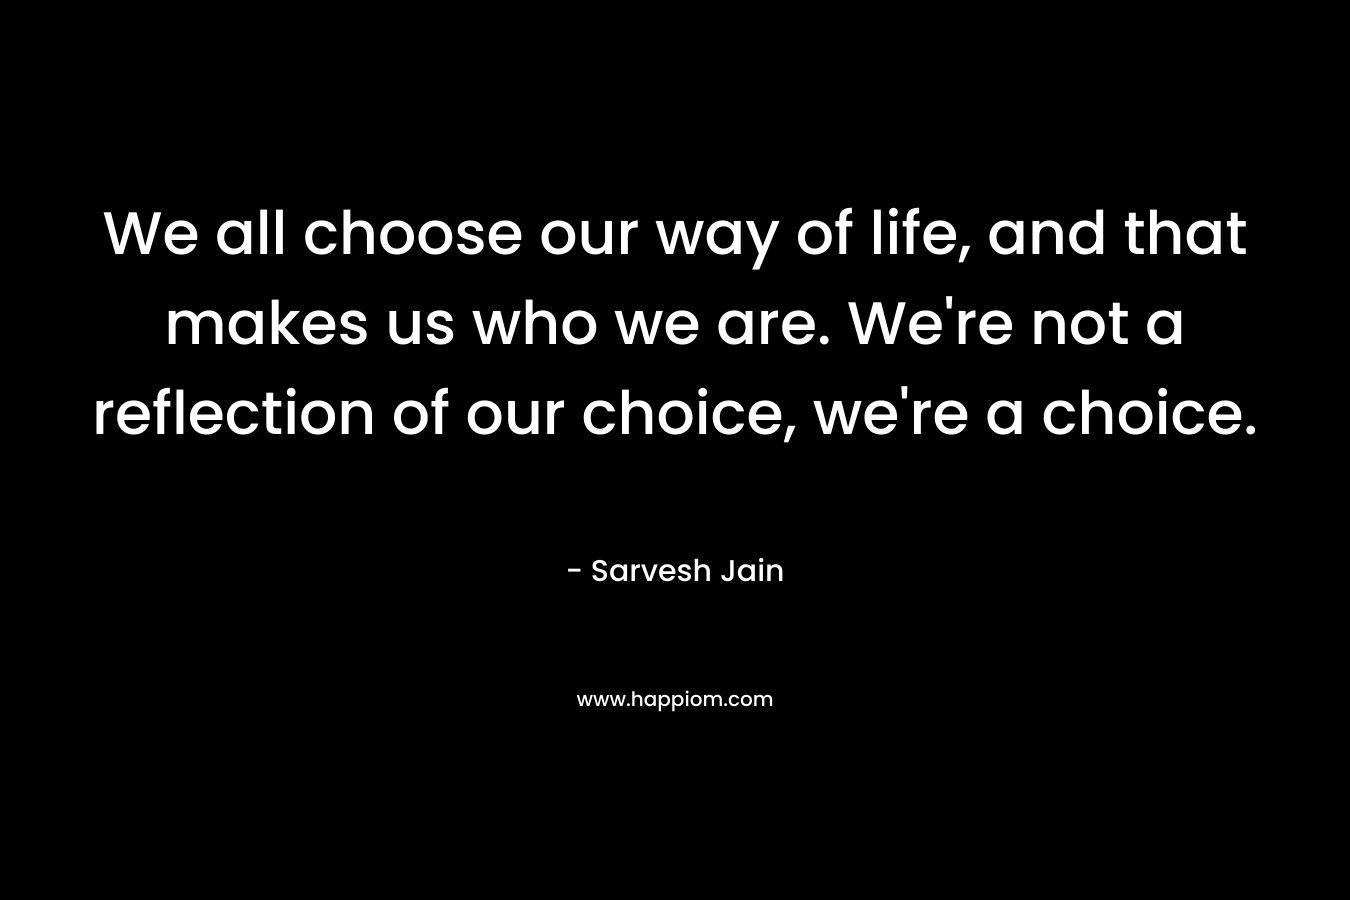 We all choose our way of life, and that makes us who we are. We're not a reflection of our choice, we're a choice.